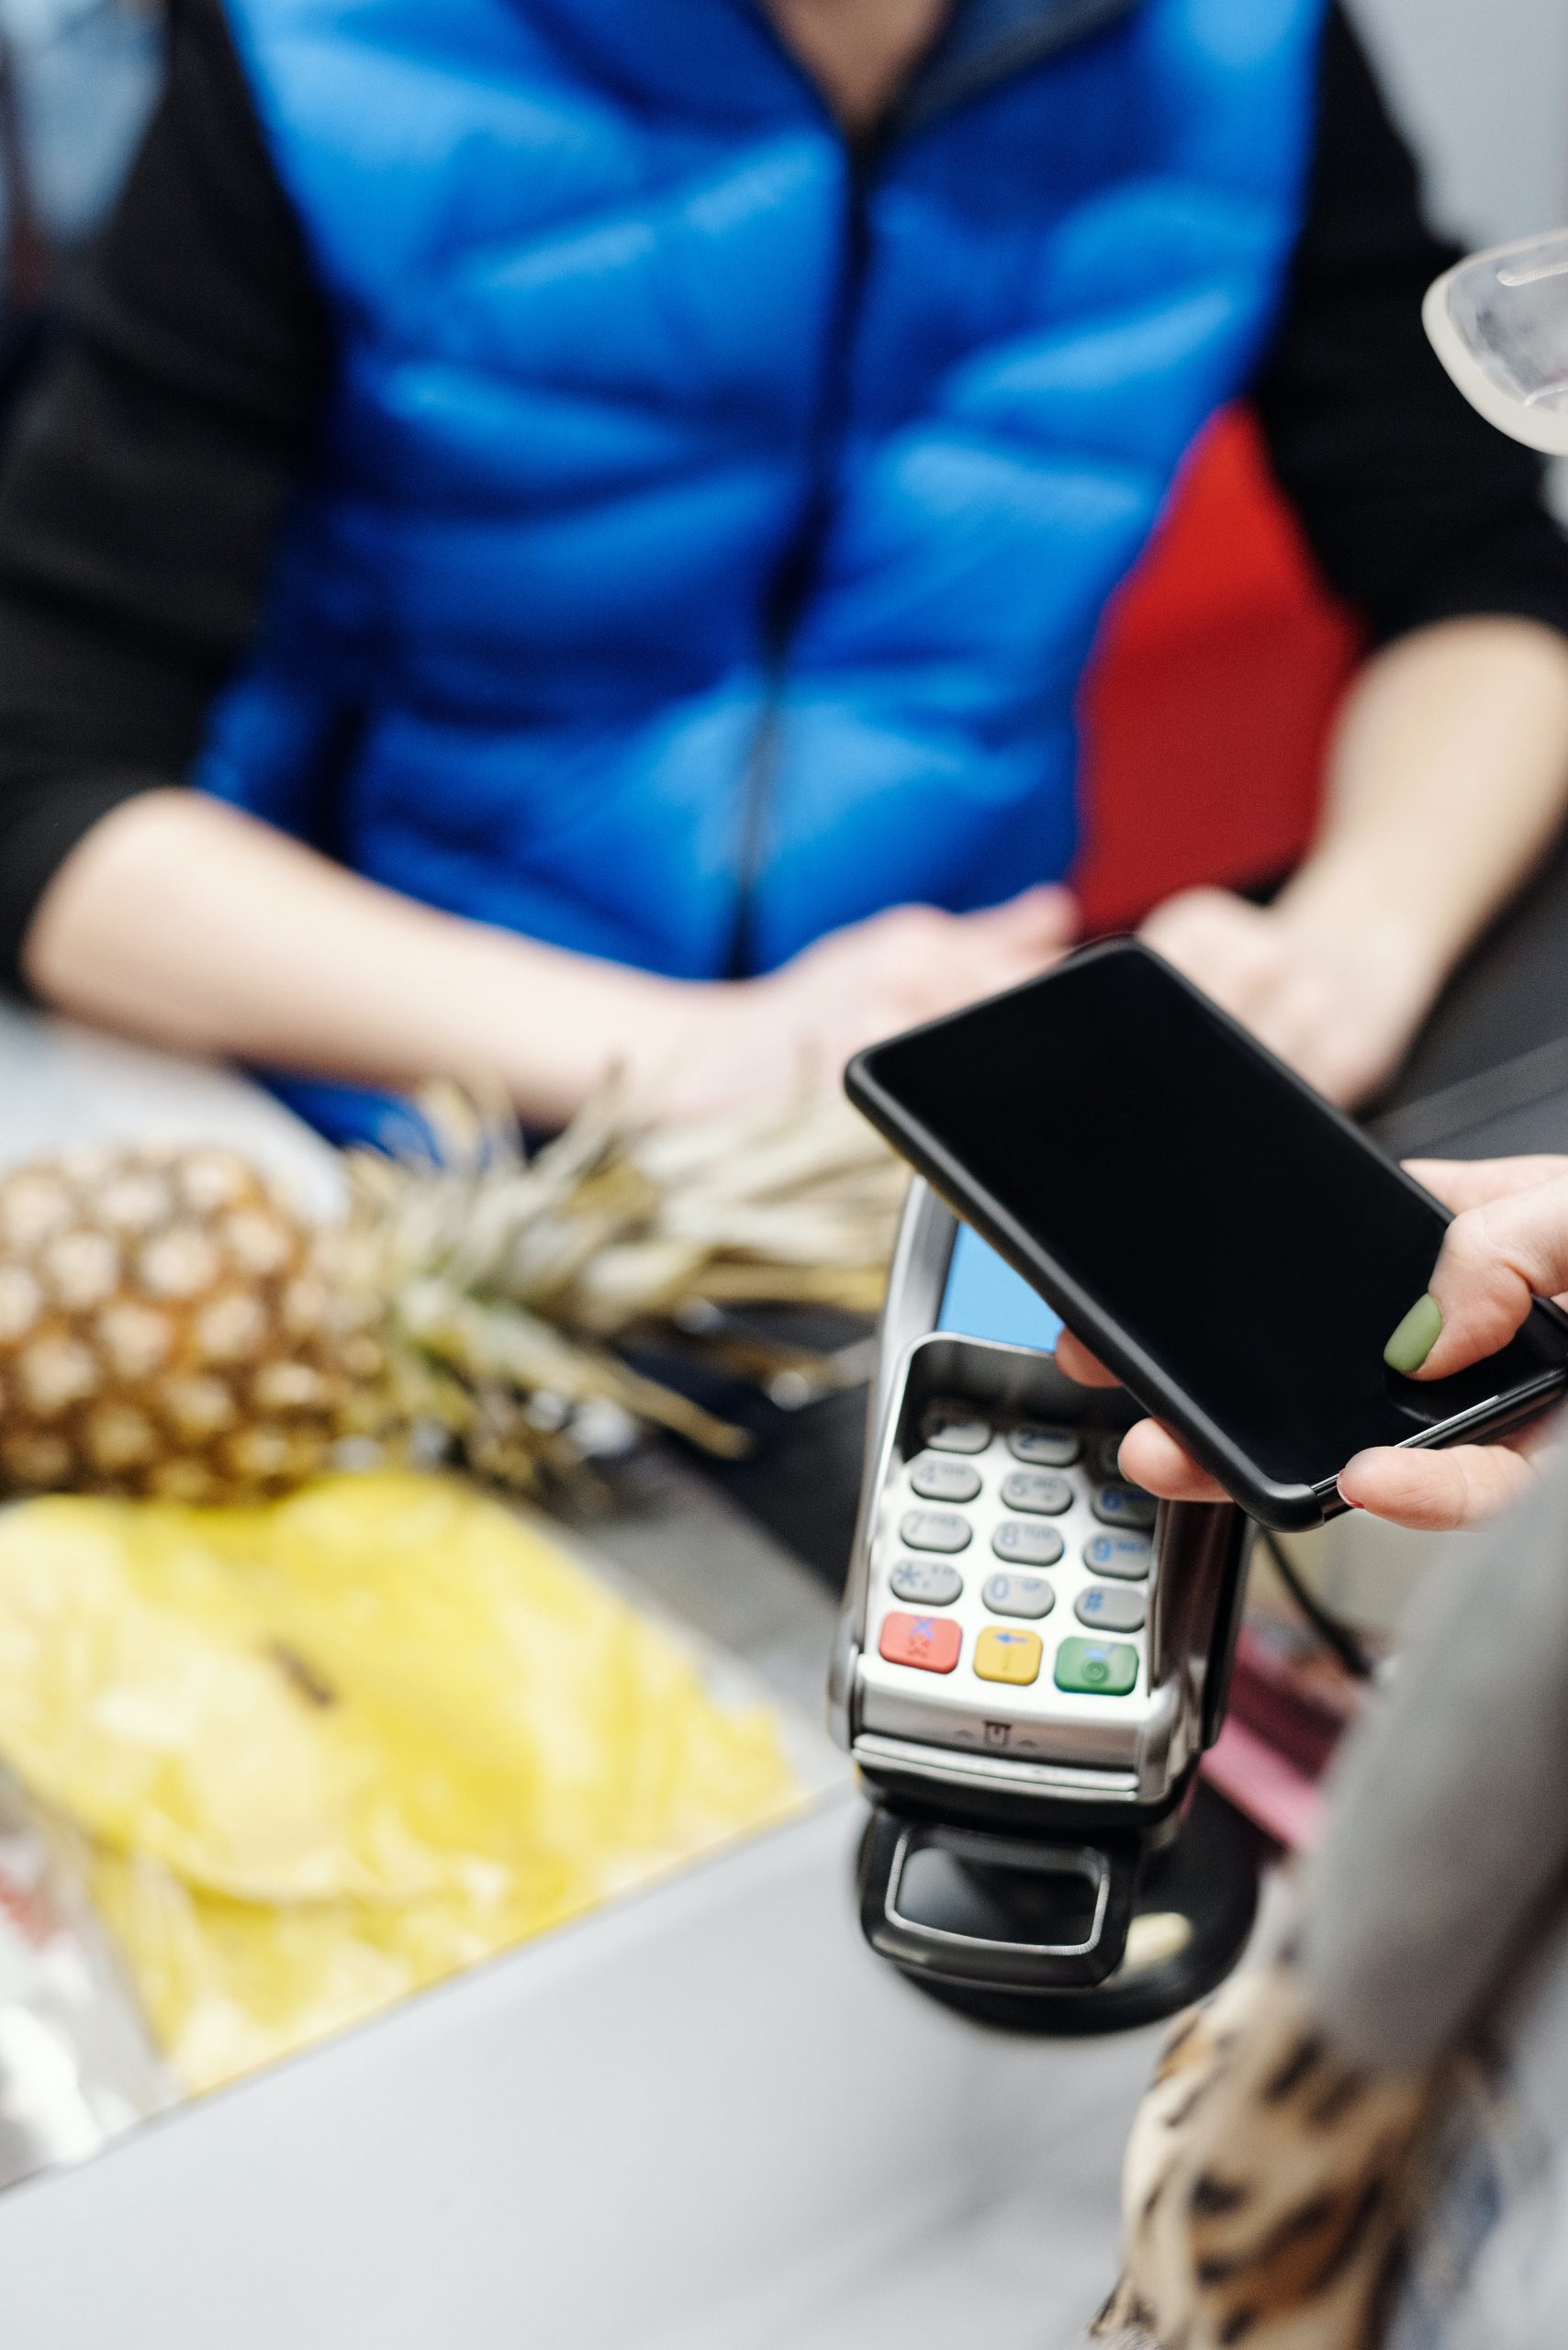 How Pix Has Influenced the Digital Payment Realm in Brazil